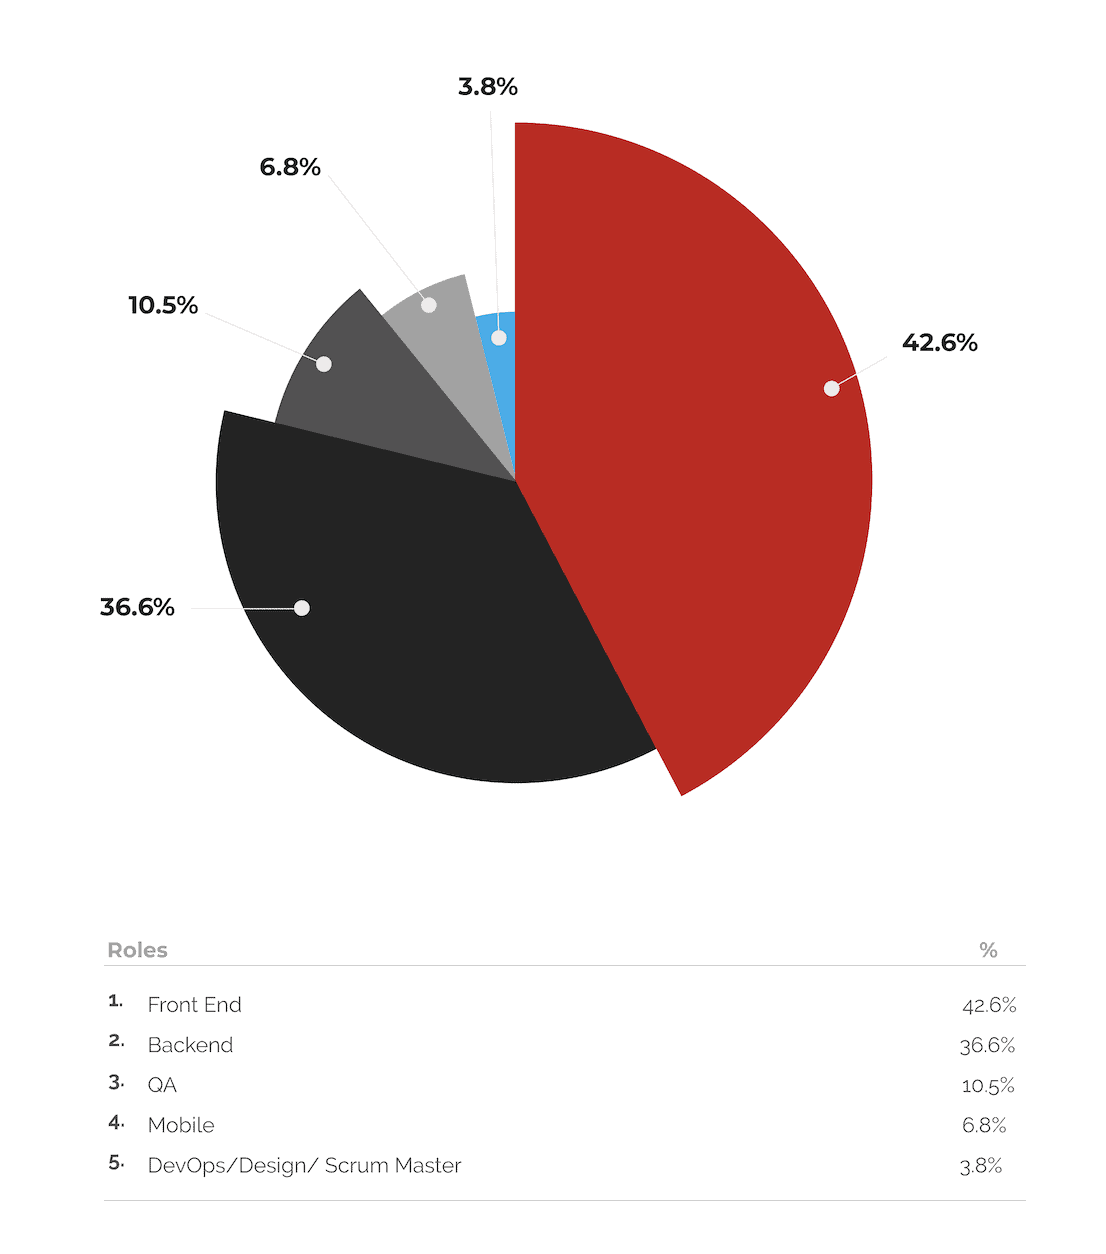 A pie chart showing software development categories and percentages